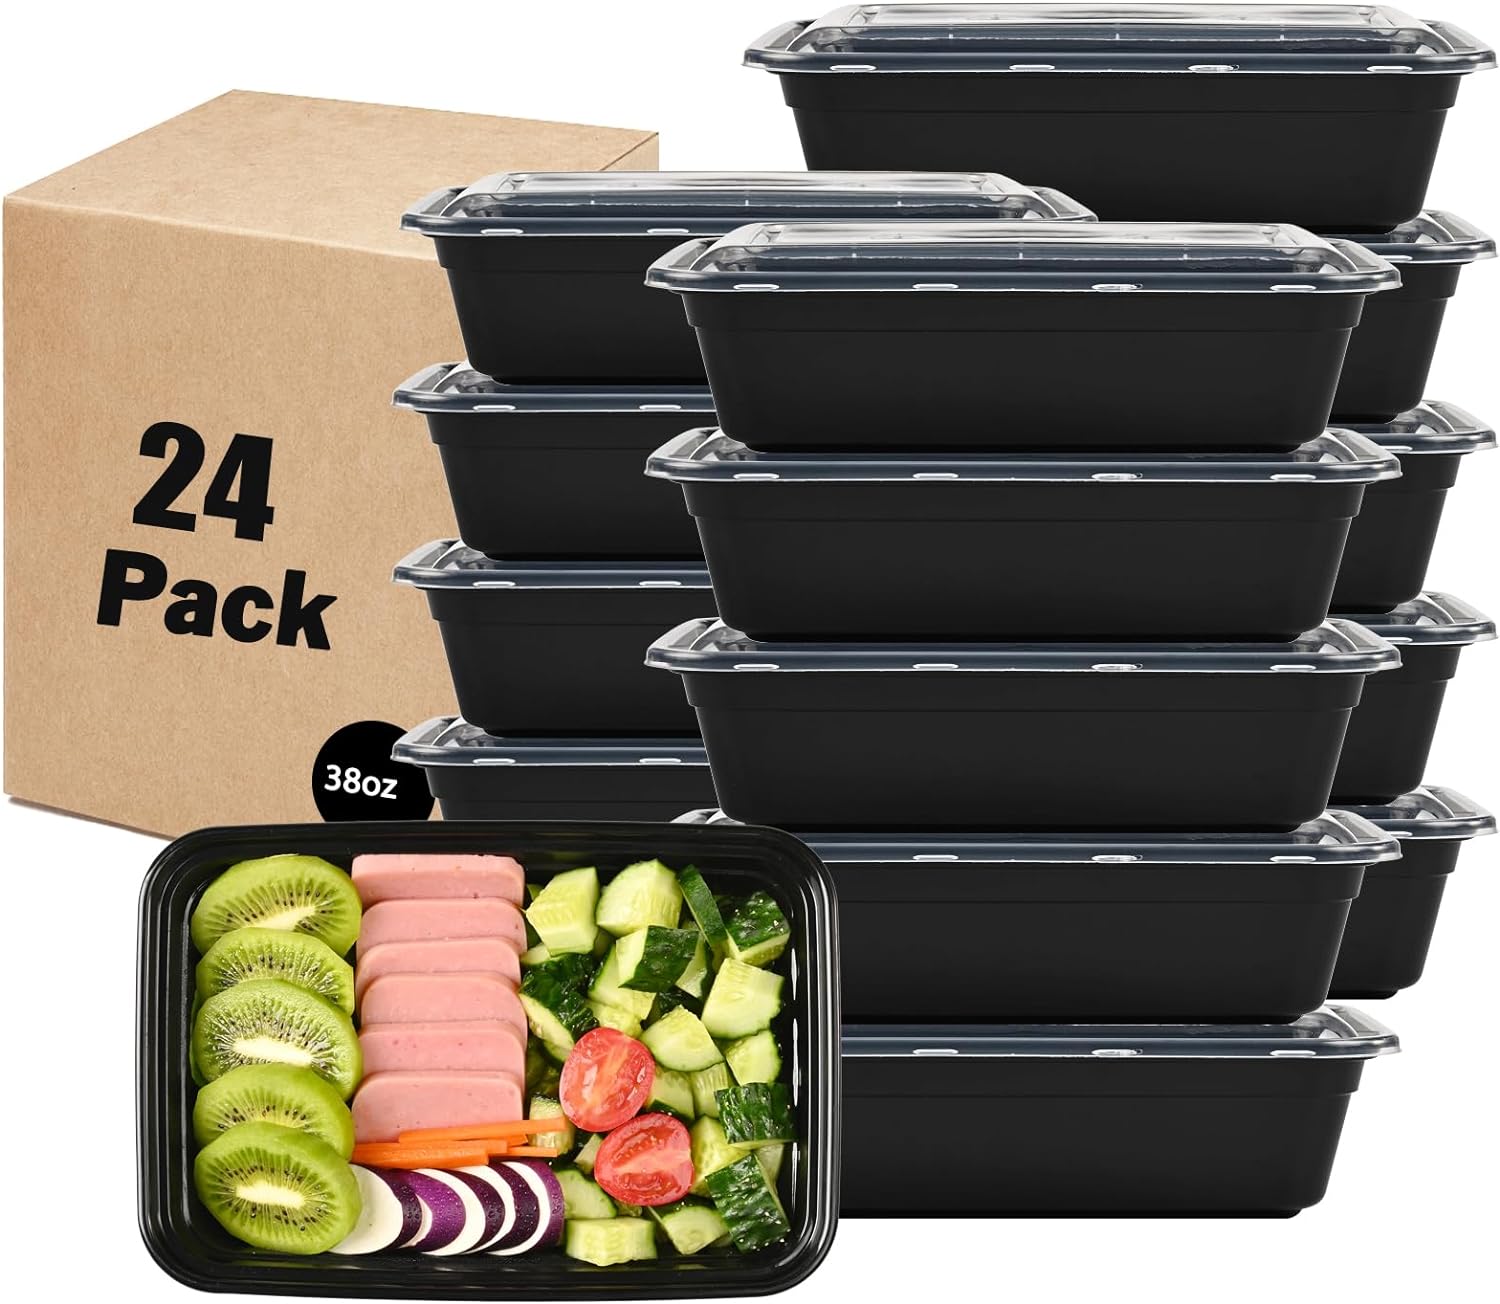 Choice 30 oz. Black 8 3/4 x 6 x 2 3/4 2-Compartment Rectangular  Microwavable Heavy Weight Container with Lid - 10/Pack